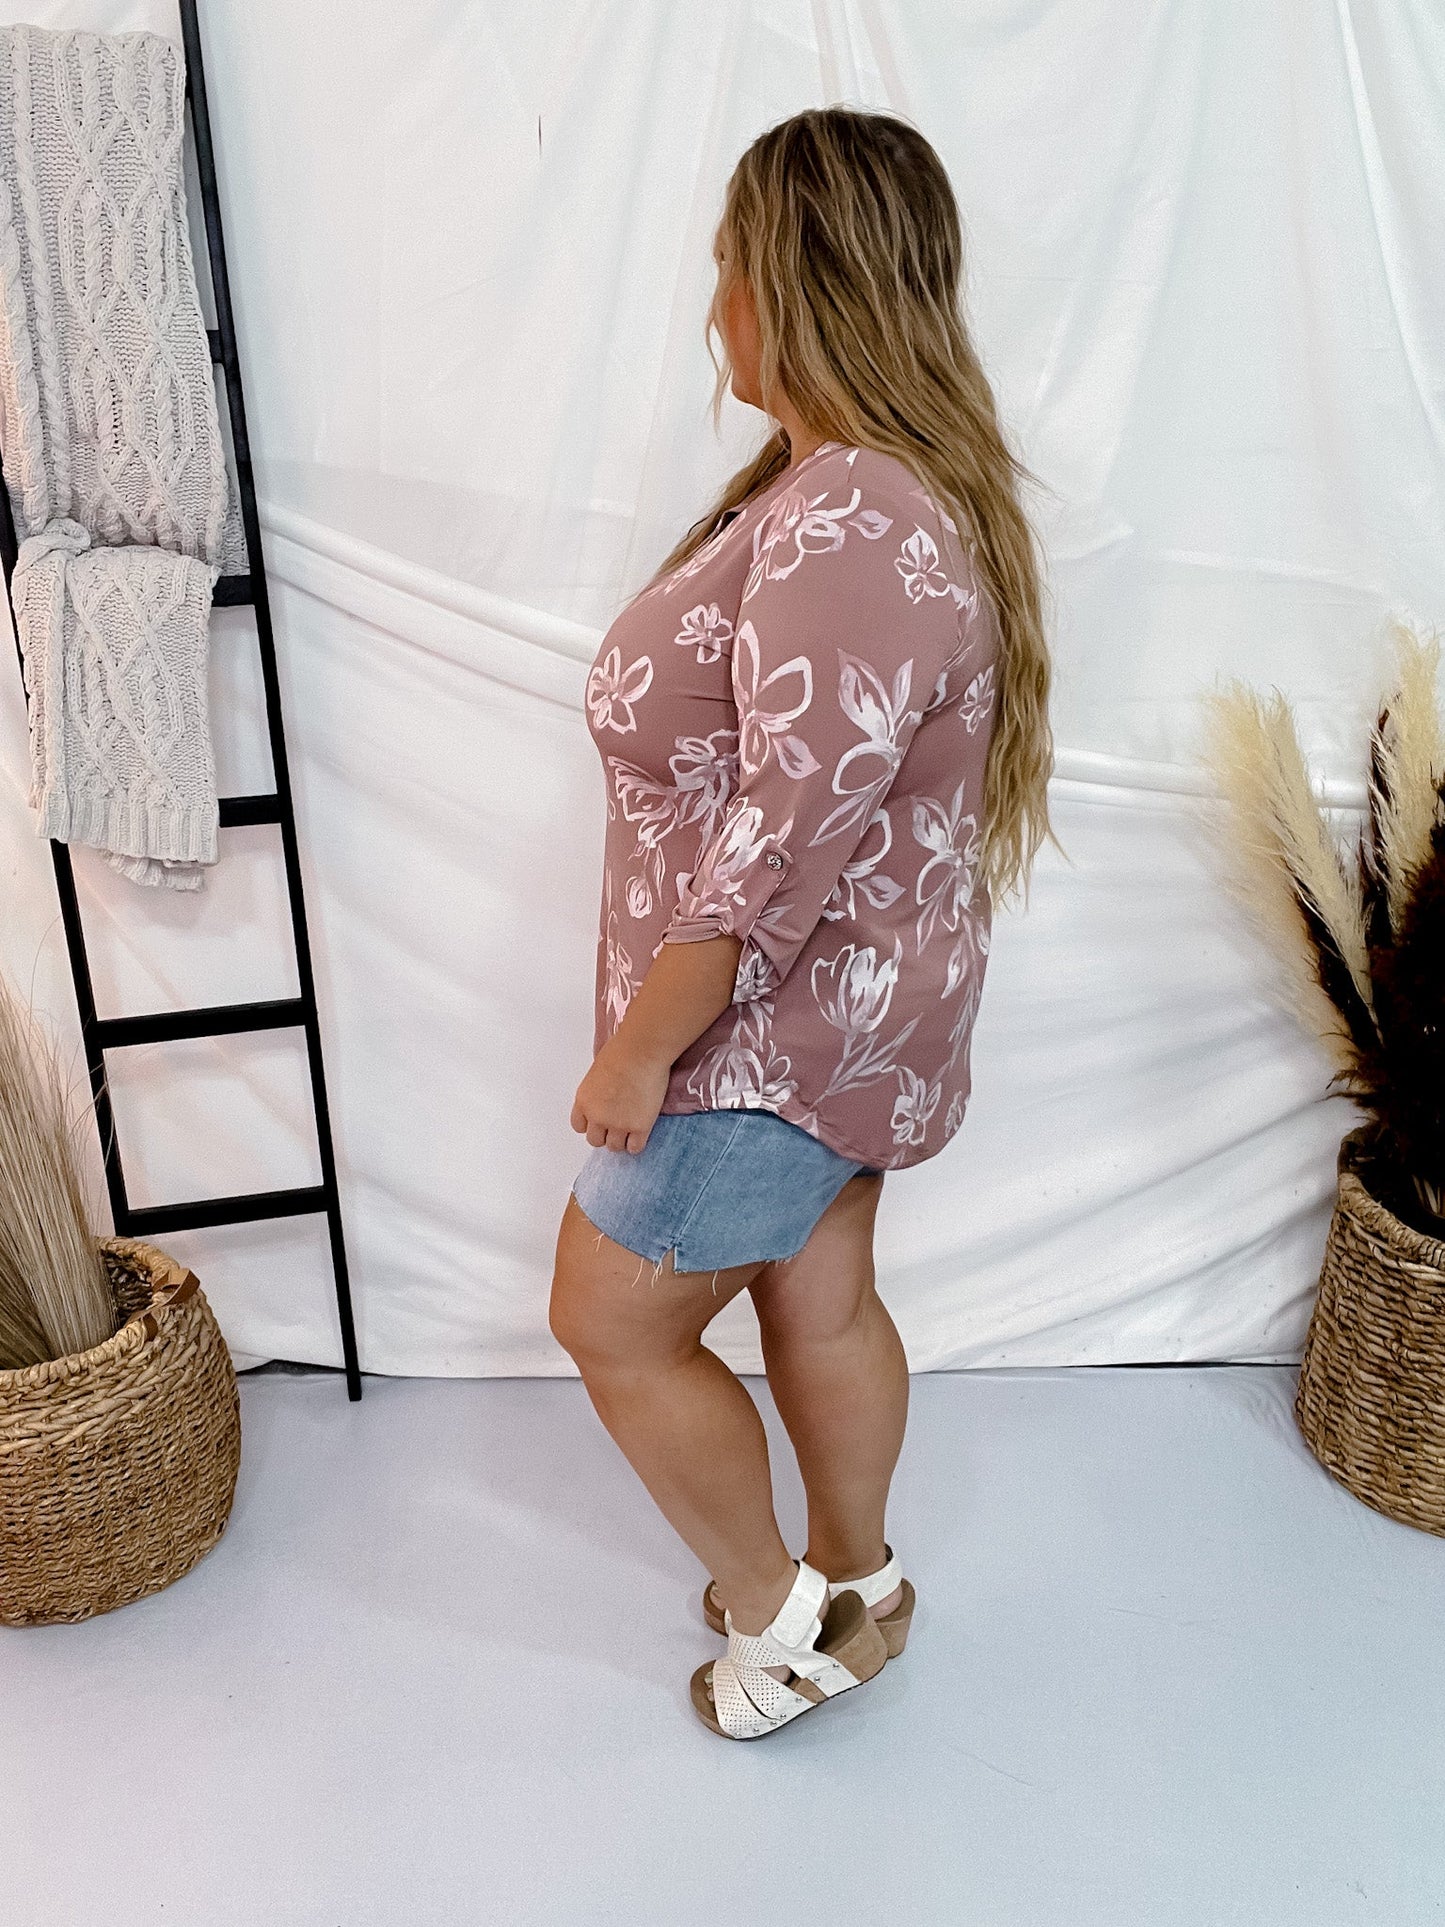 Dusty Mauve Floral Print Top - Whiskey Skies - WHITE BIRCH